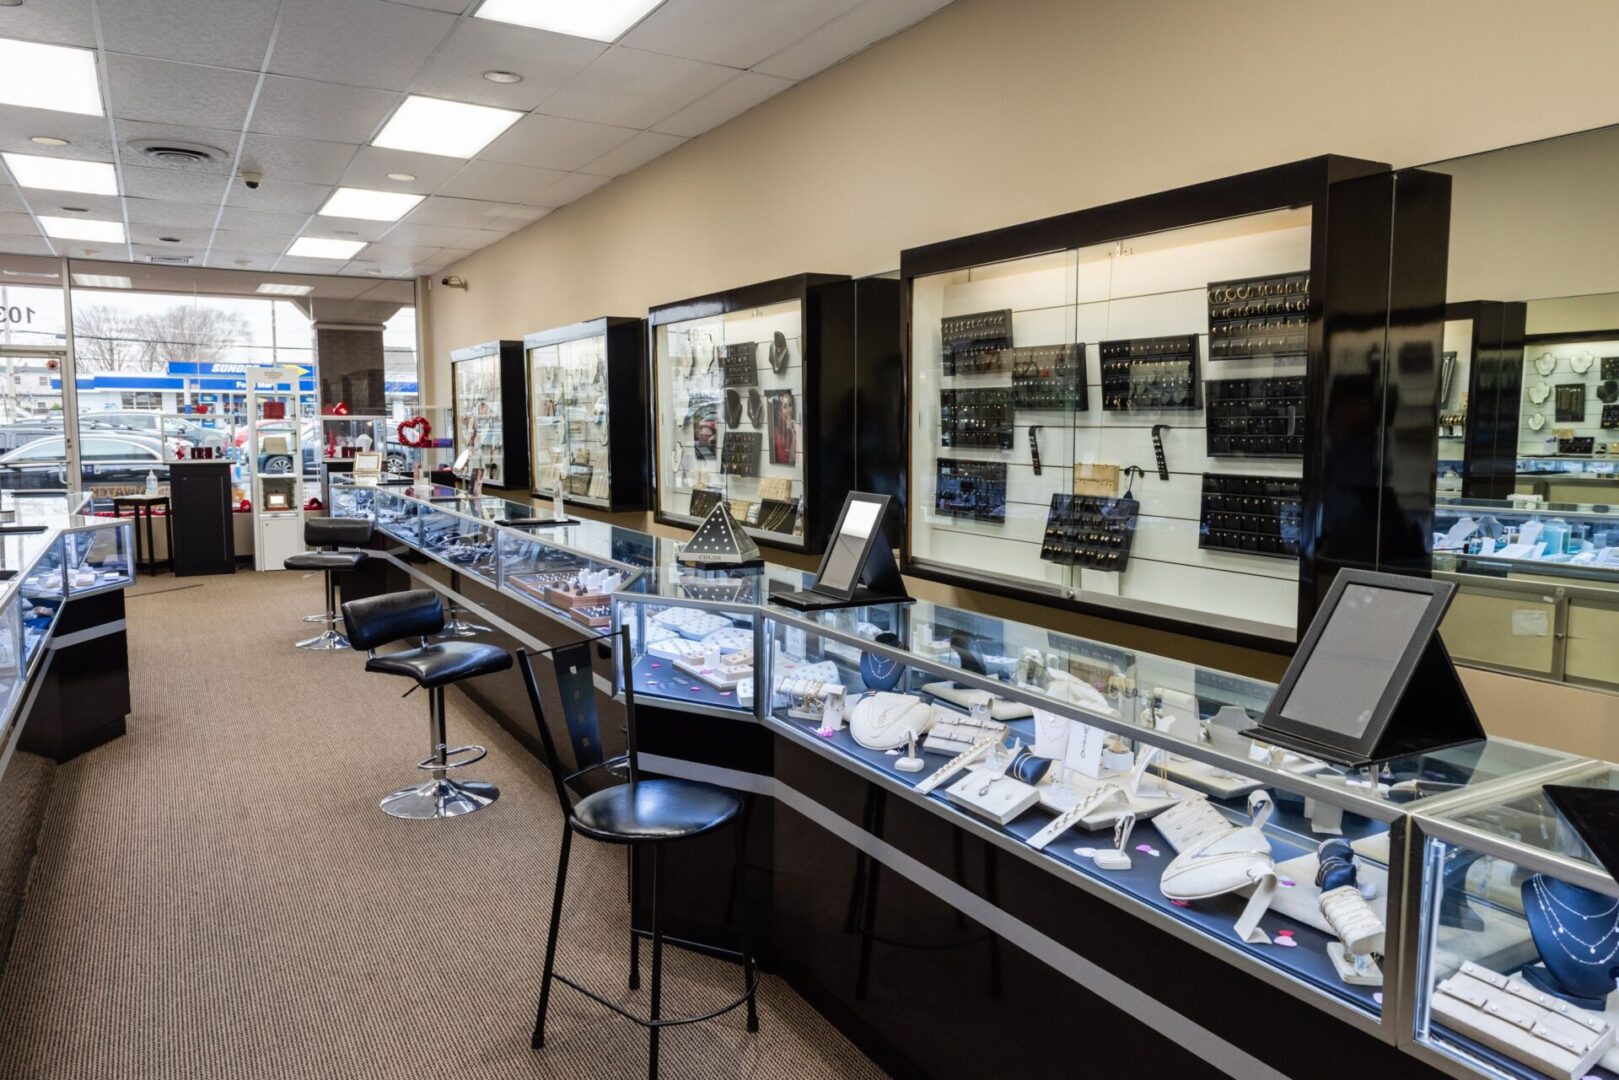 A store with many different types of watches on display.